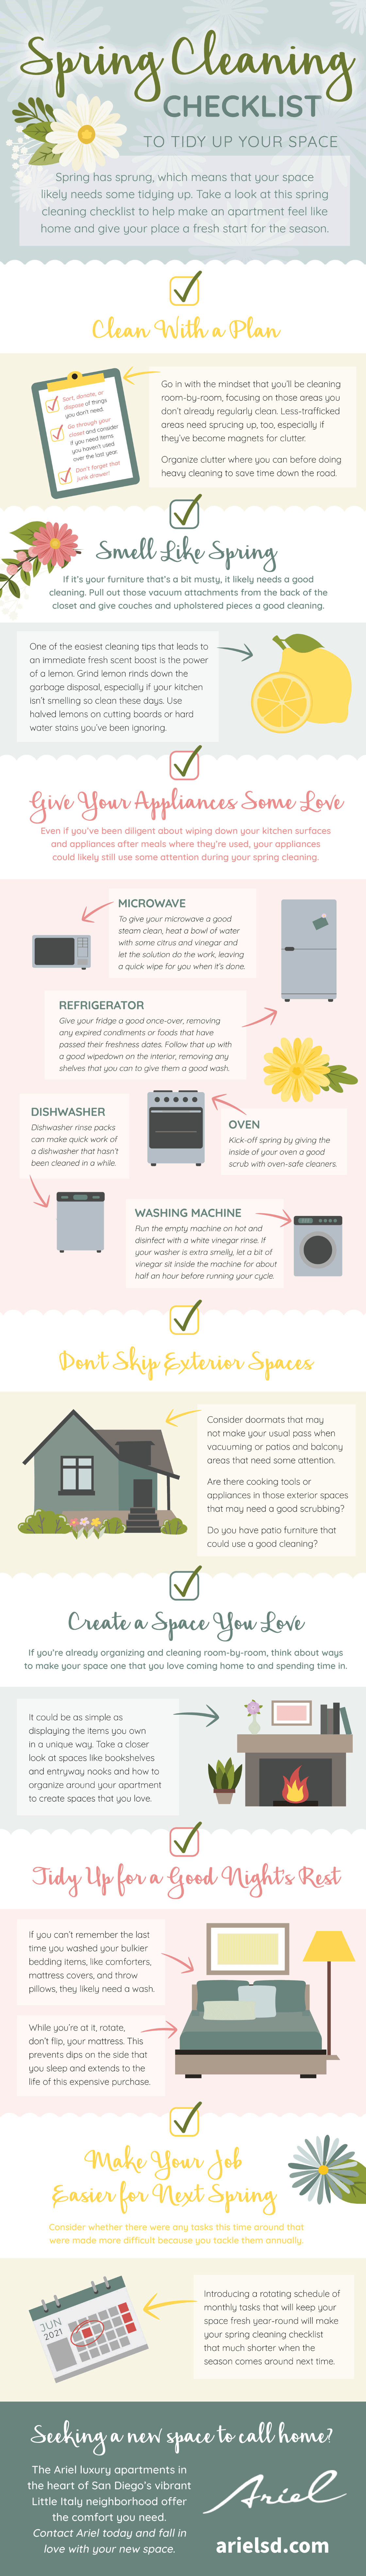 Spring Cleaning Tips Infographic - Ariel Apartments